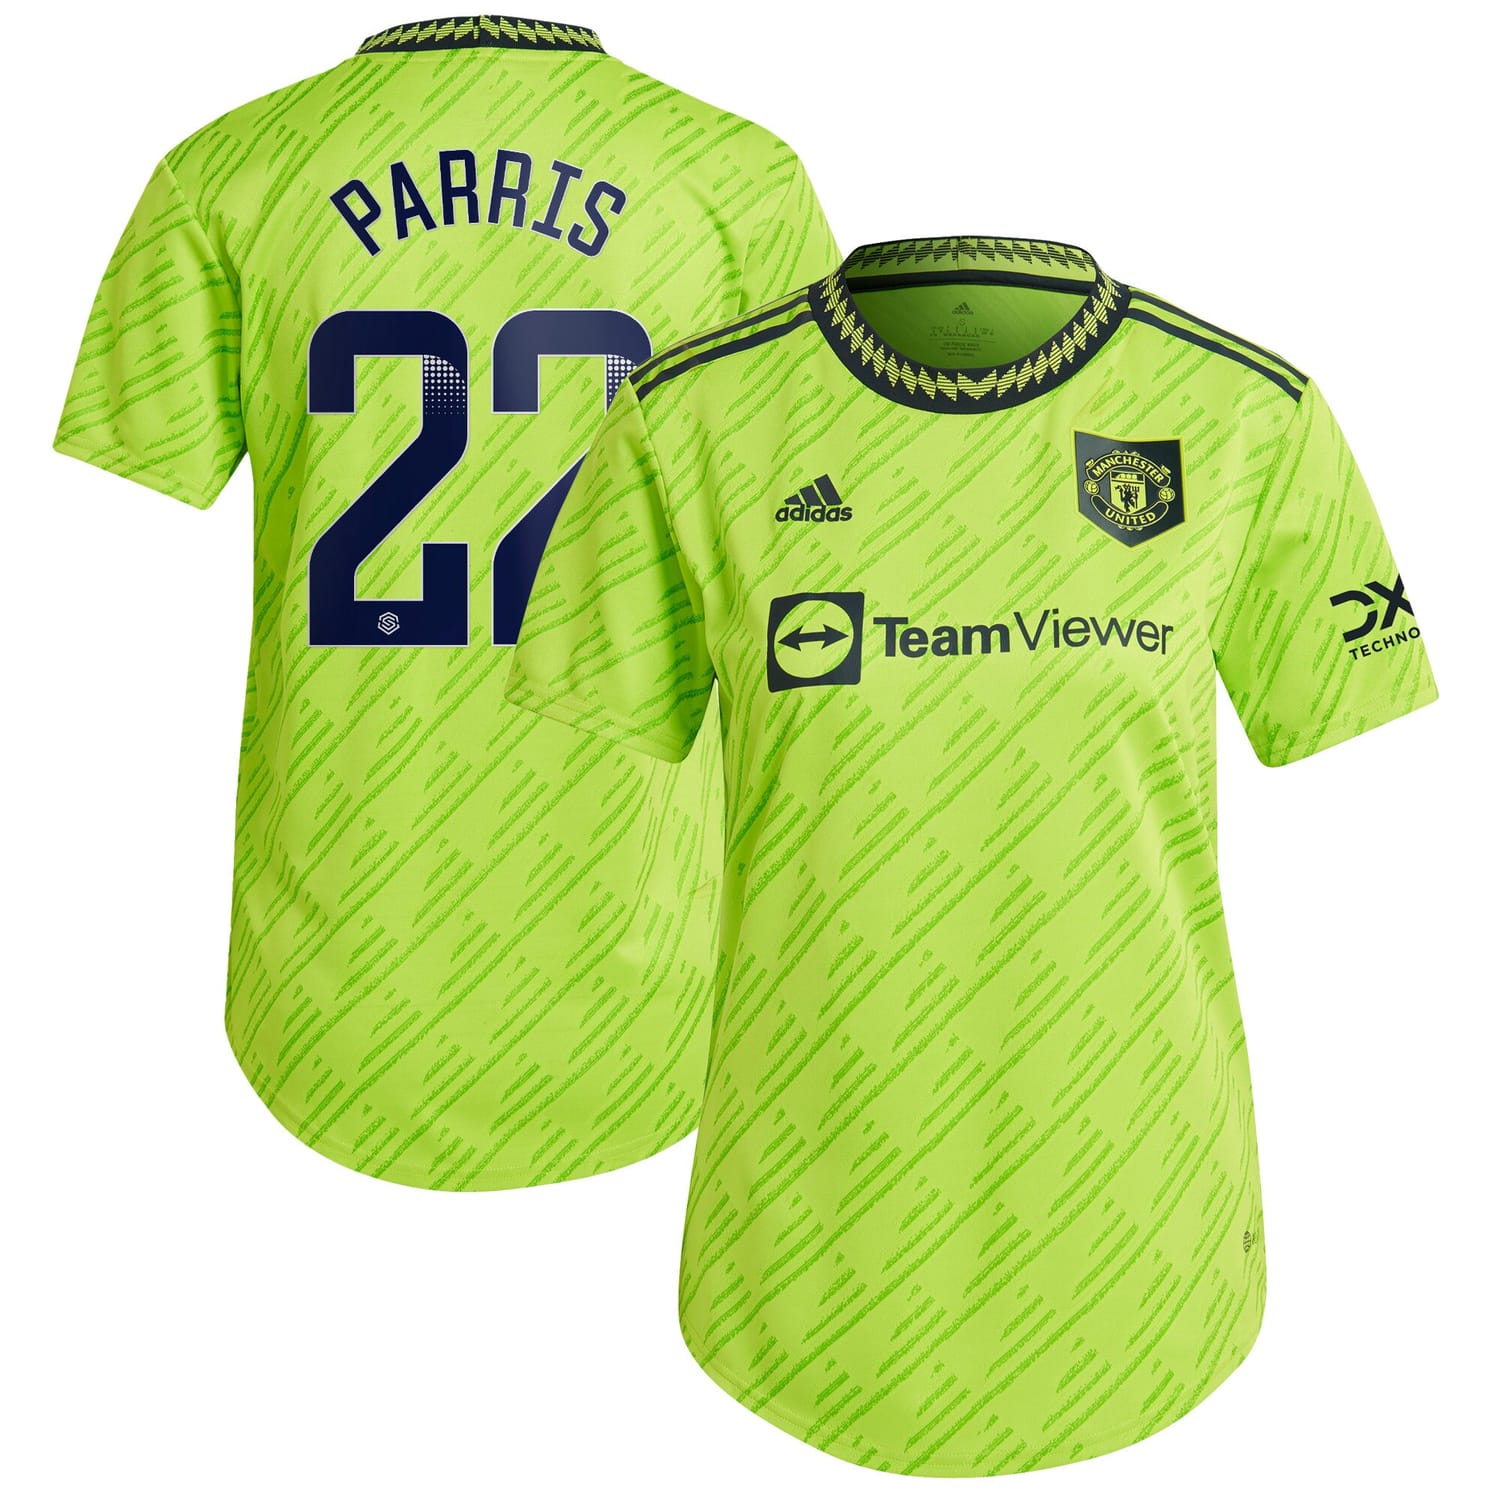 Premier League Manchester United Third WSL Authentic Jersey Shirt 2022-23 player Nikita Parris 22 printing for Women